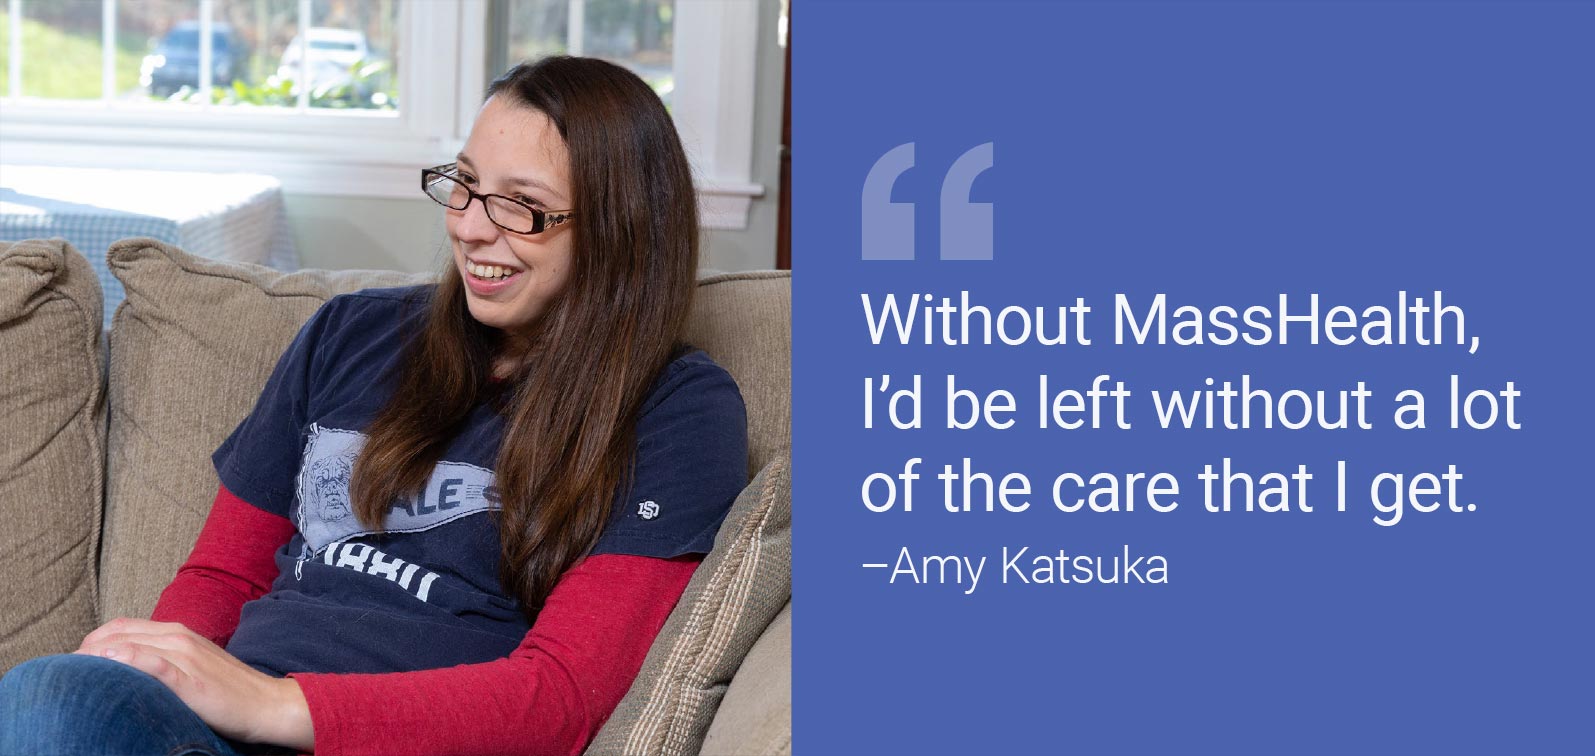 Photo of Amy Katsuka with quote